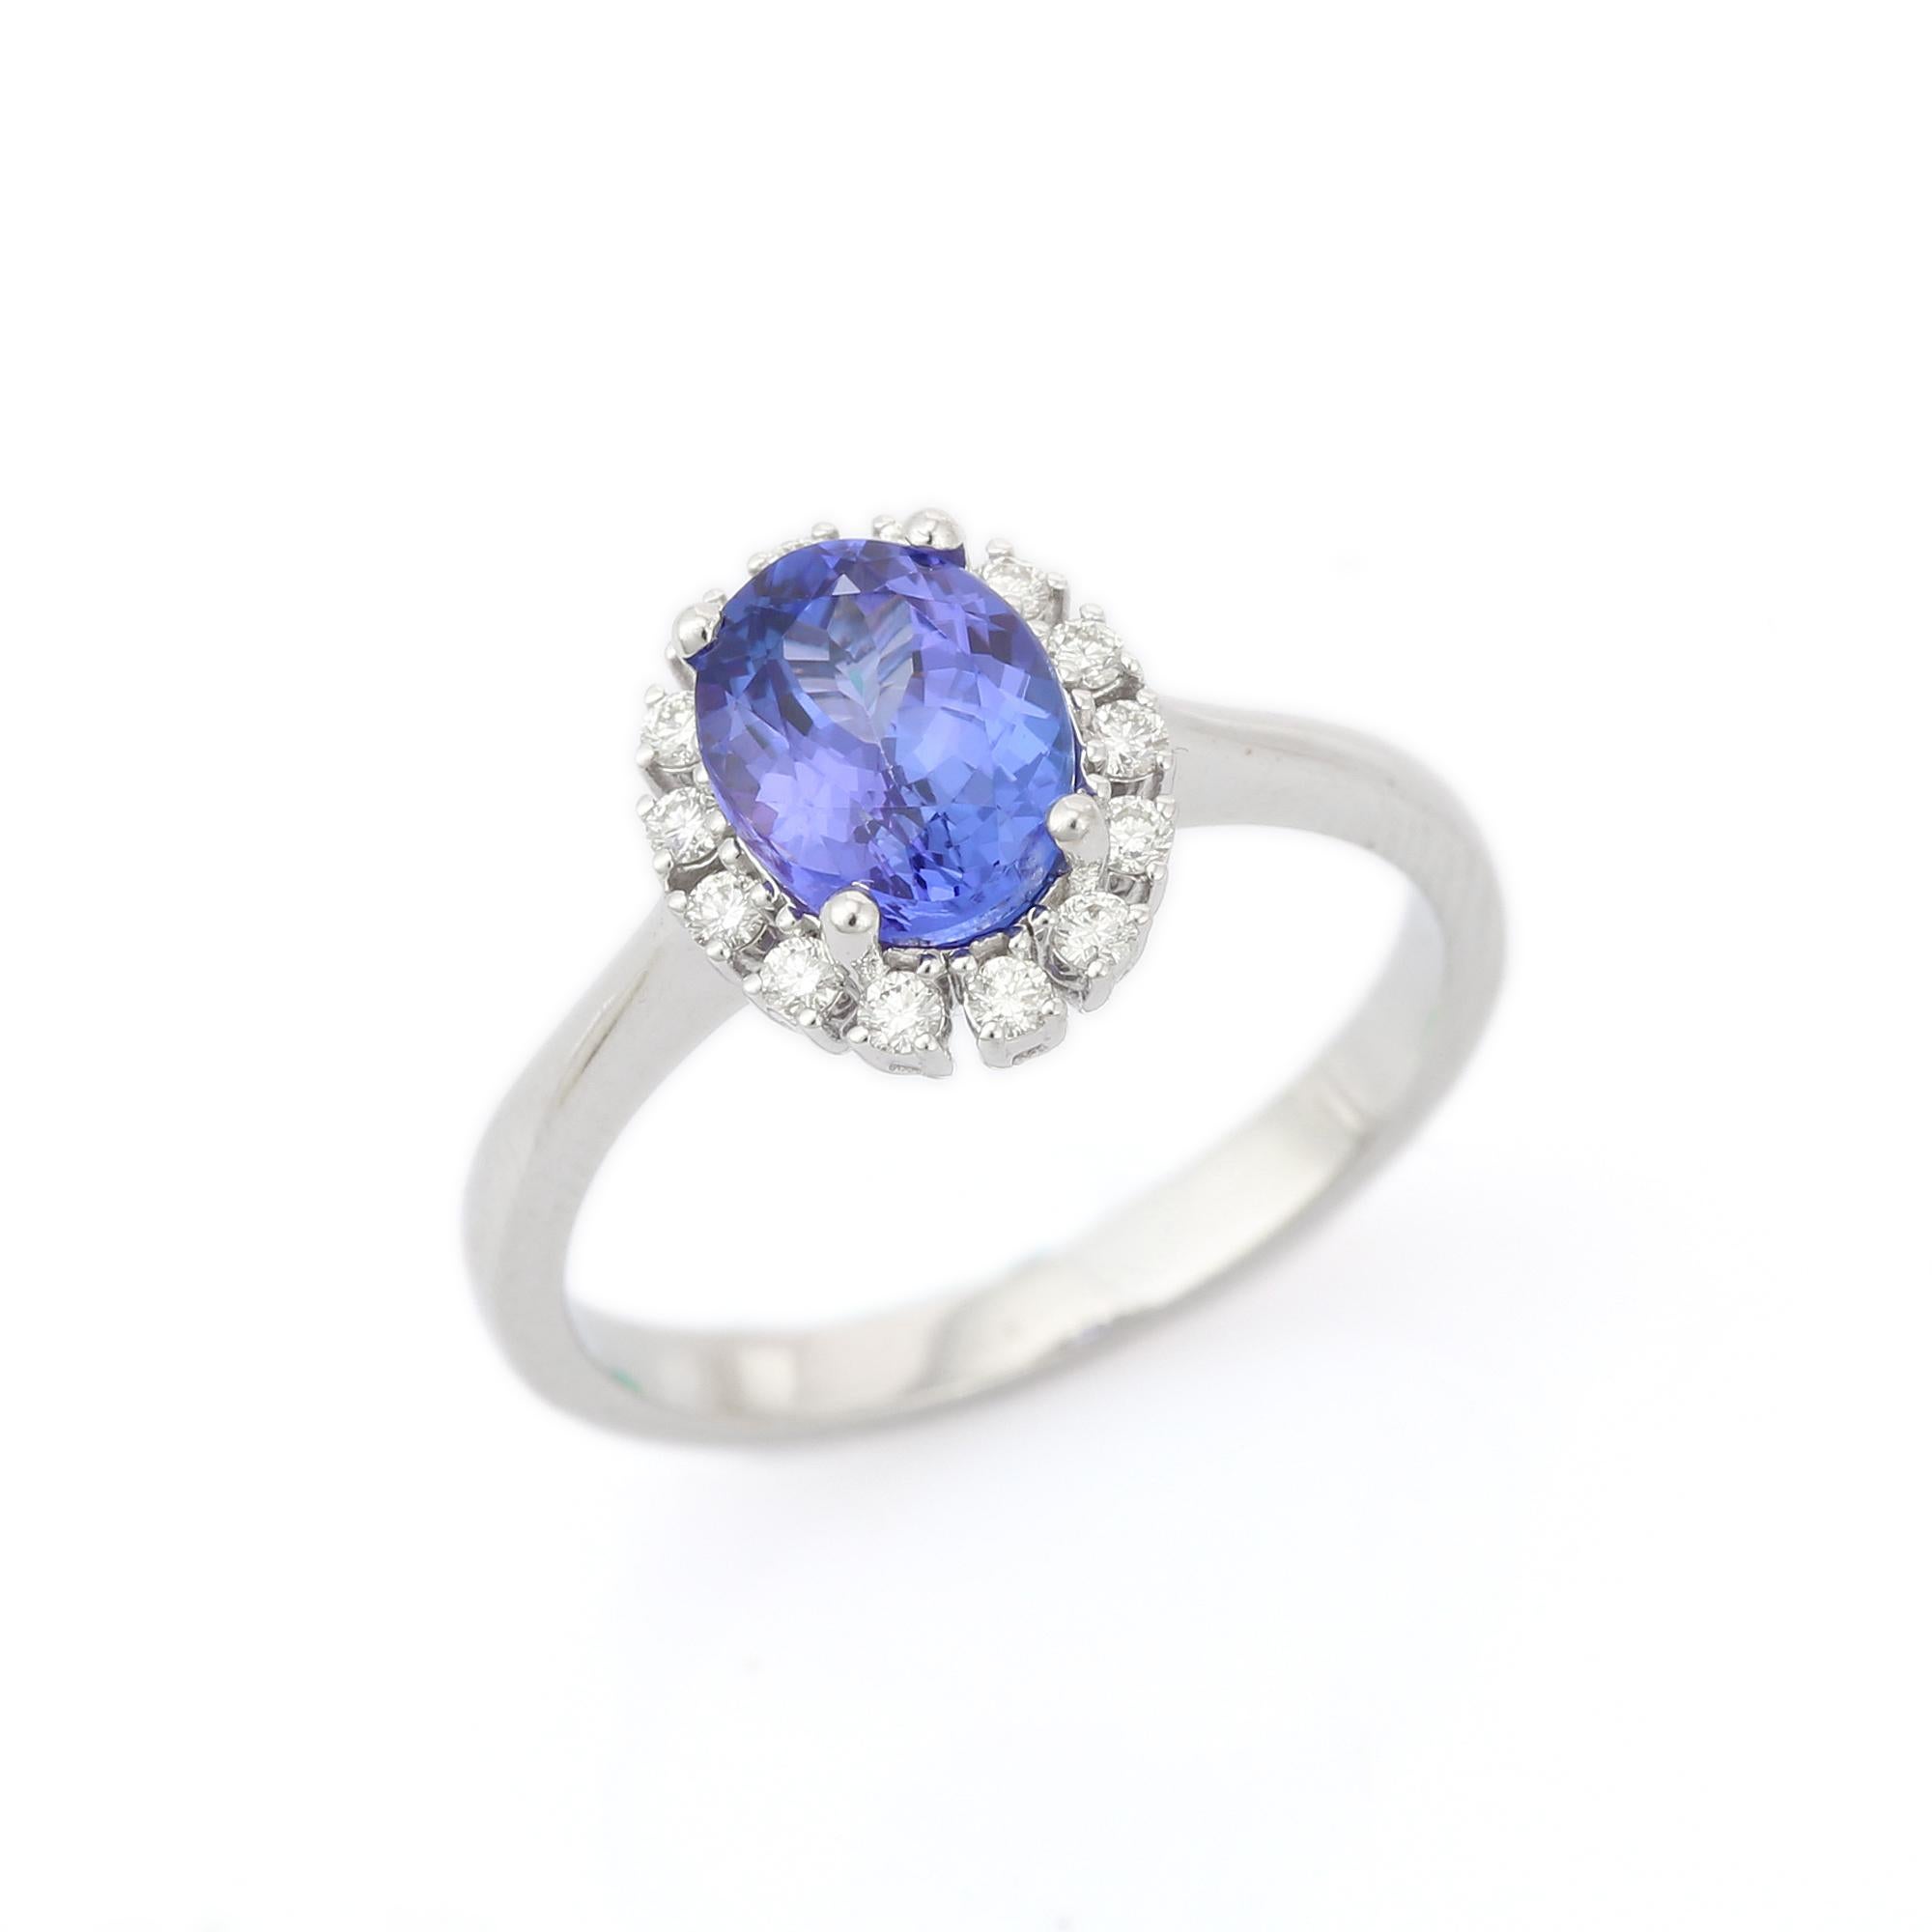 For Sale:  18k Solid White Gold Tanzanite and Diamond Ring  4